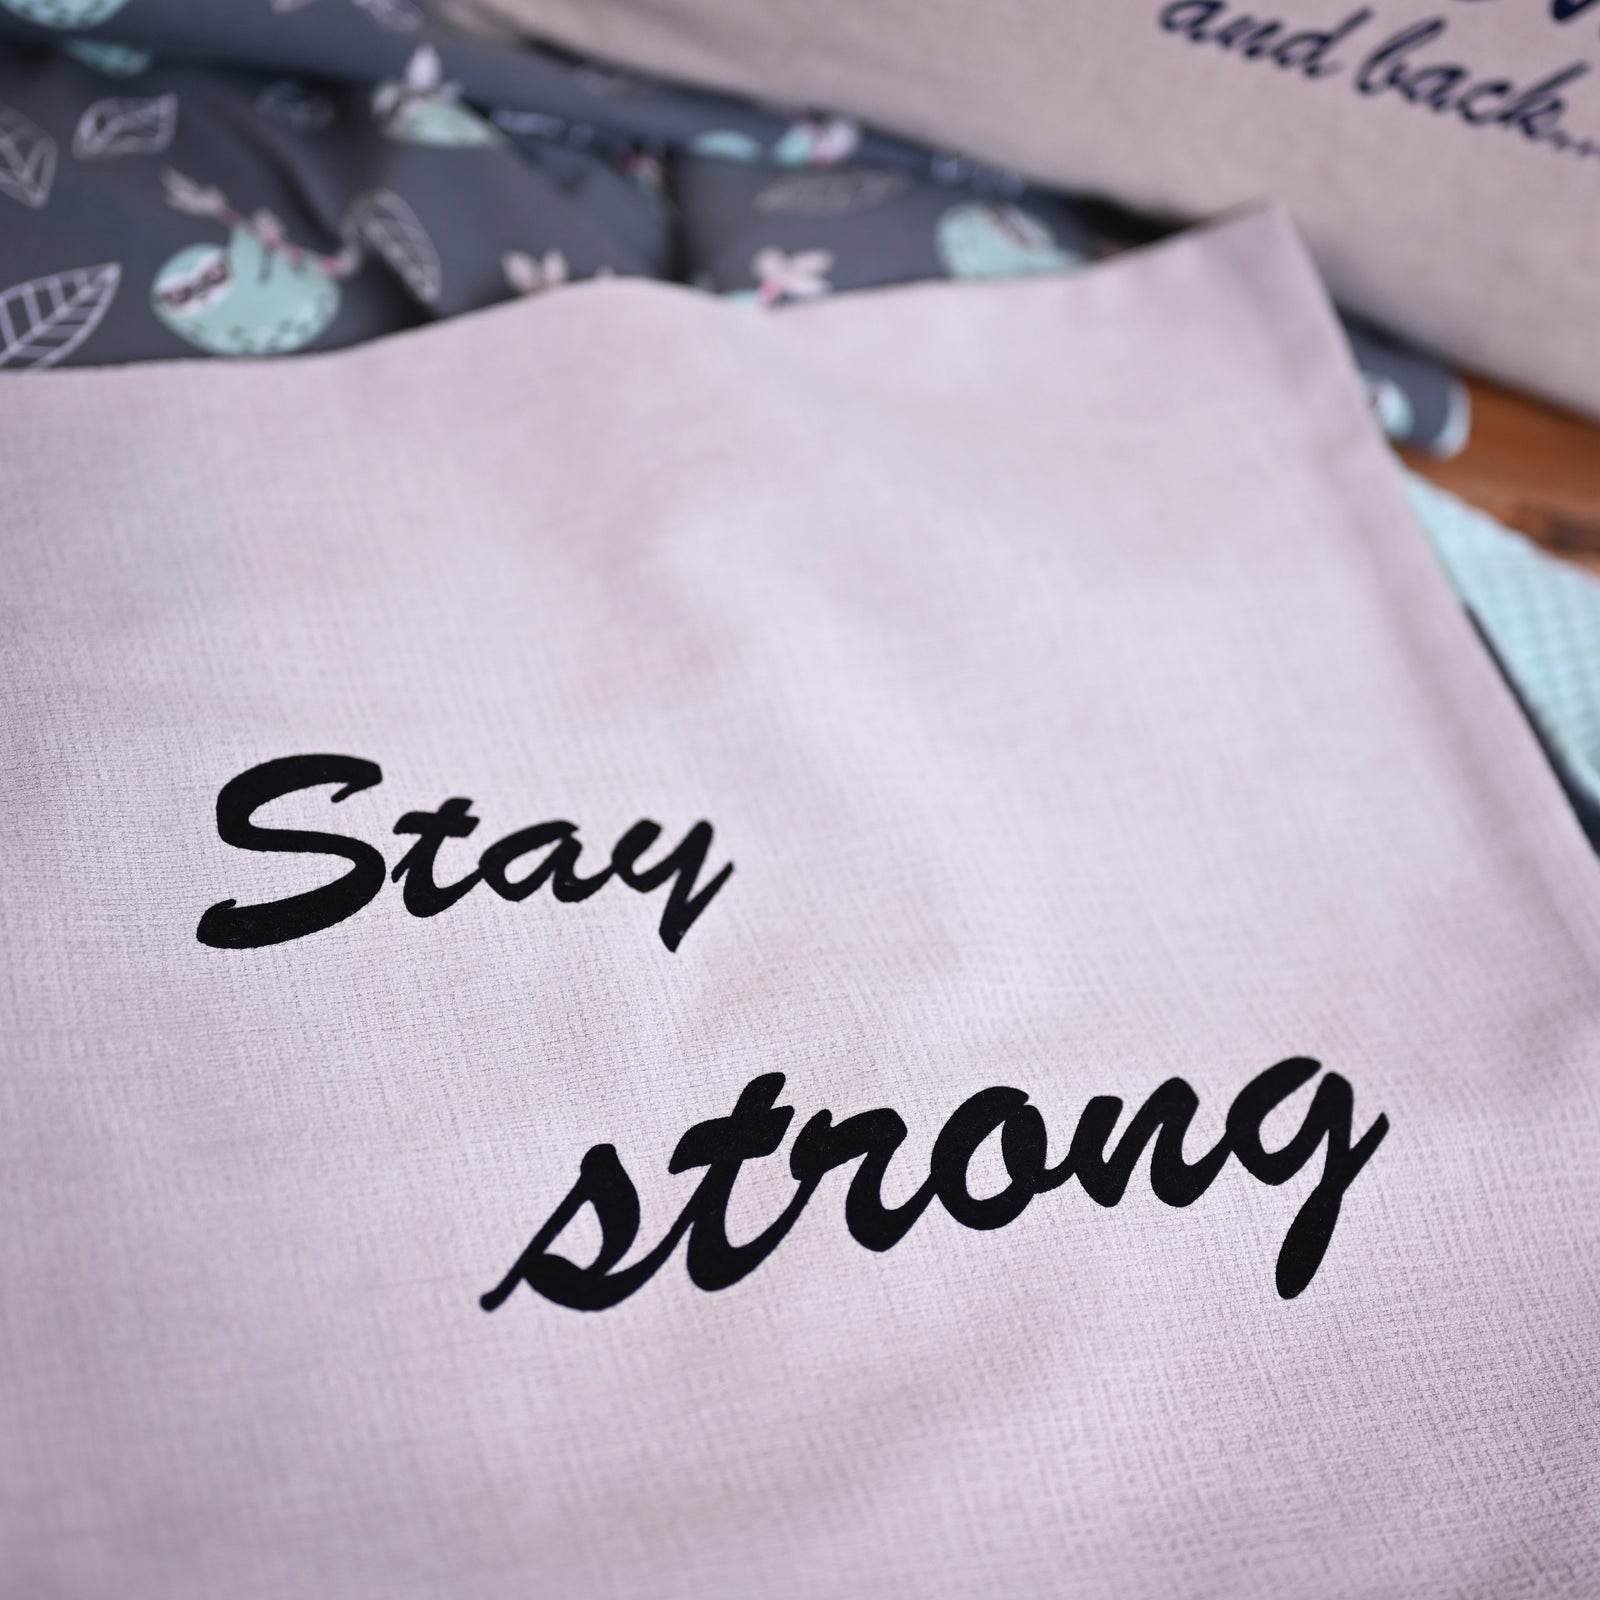 Kissen "Stay Strong" / Coussin "Stay Strong"